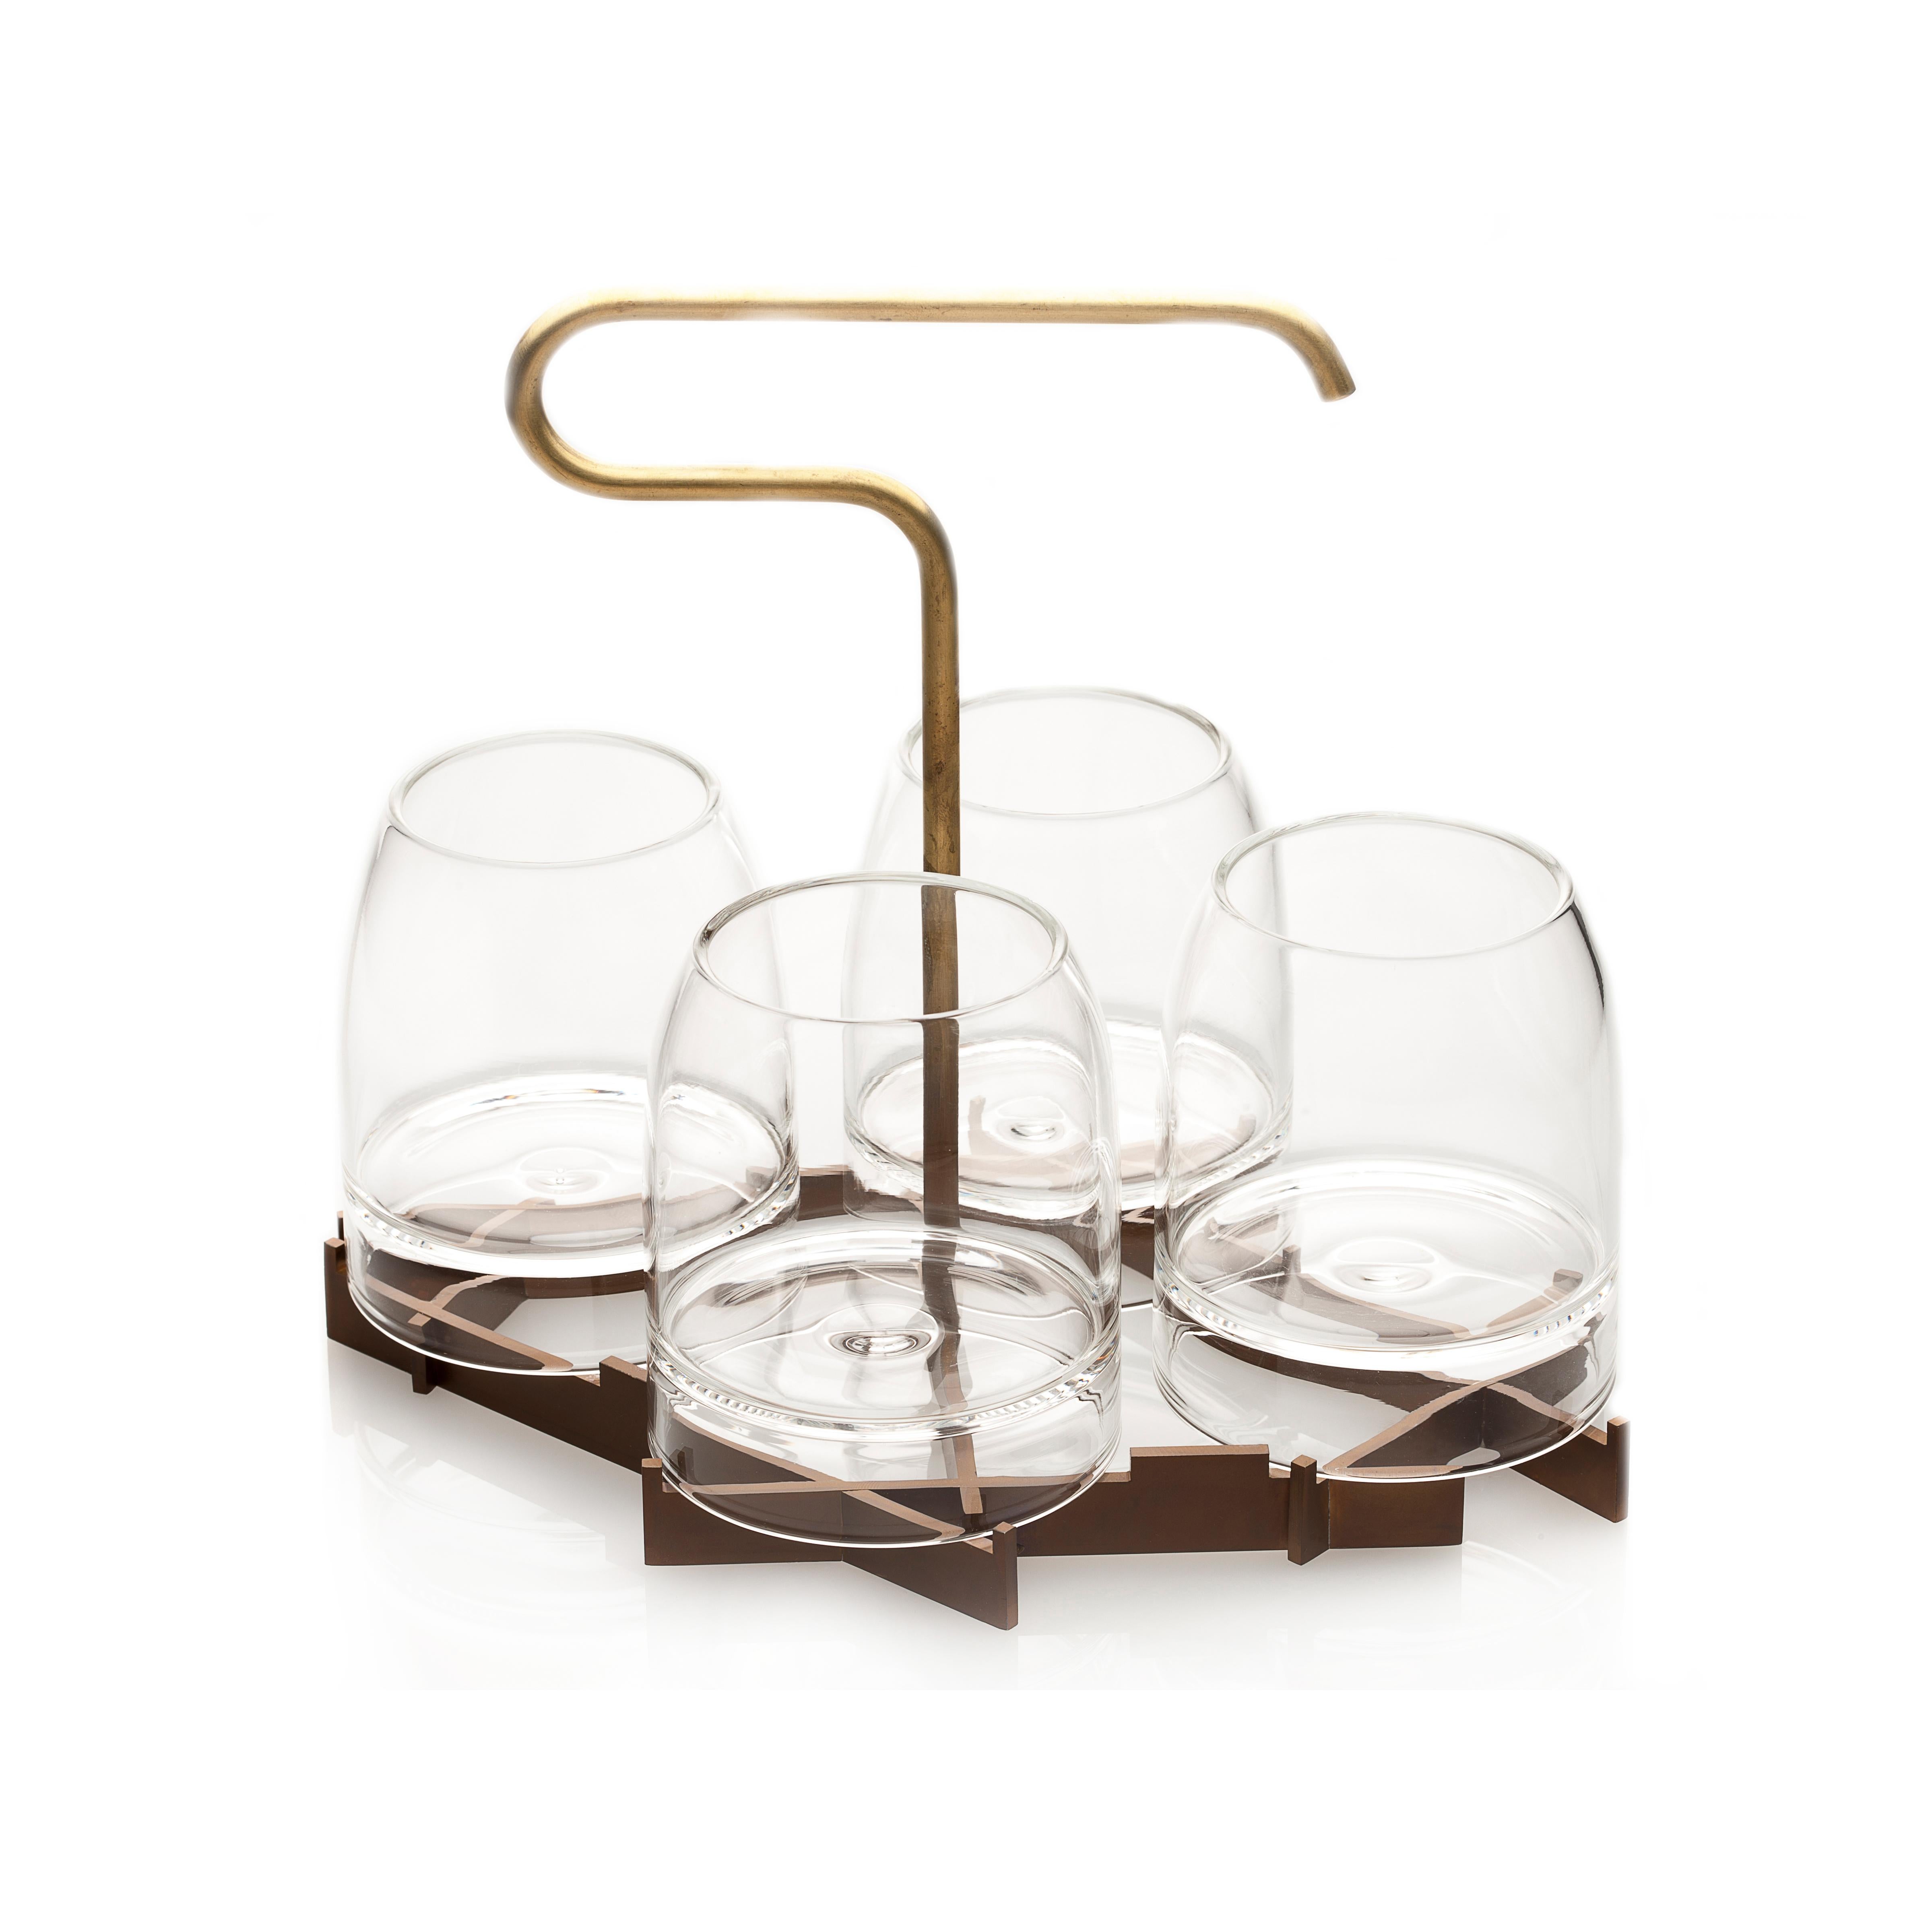 Includes one rare presenter and four rare whiskey glasses

Inspired by the pleasures of fine whisky, the rare presenter, by gentner design, elevates the experience through the art of presentation. The suspended tray with a unique handle allows it